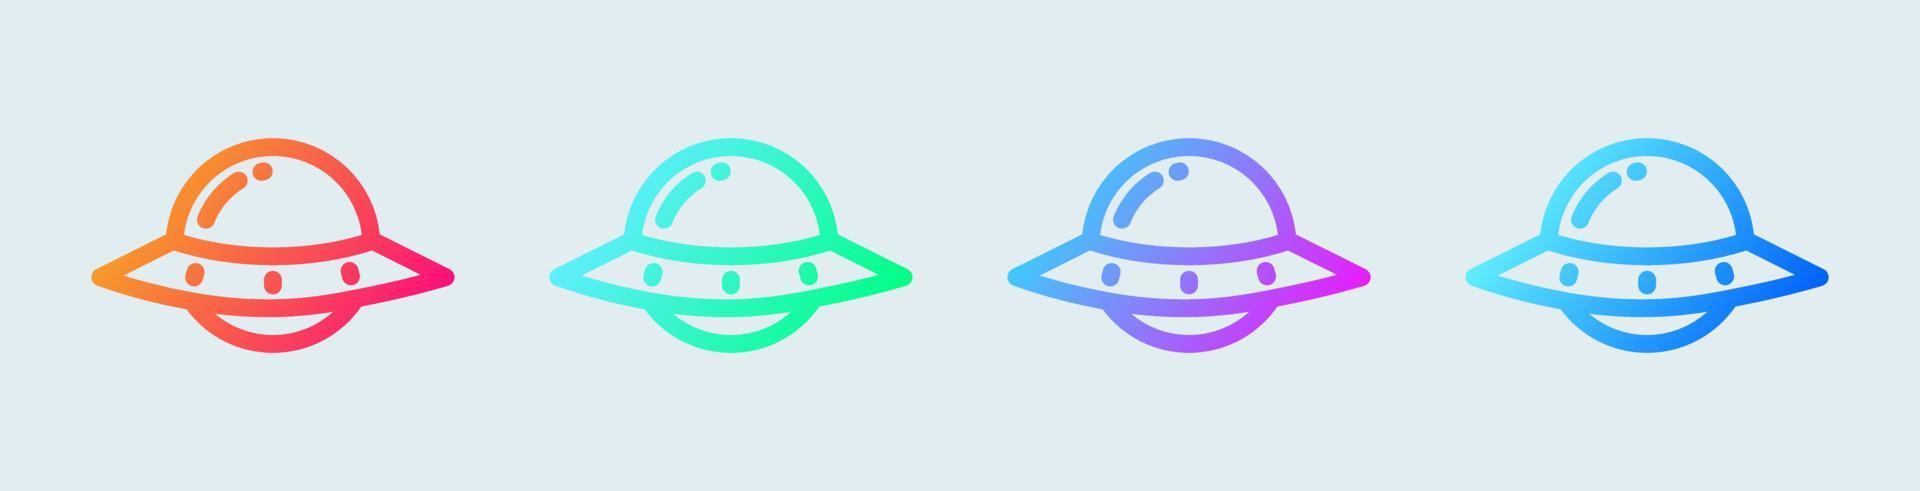 Ufo line icon in gradient colors. Alien space ship signs vector illustration.